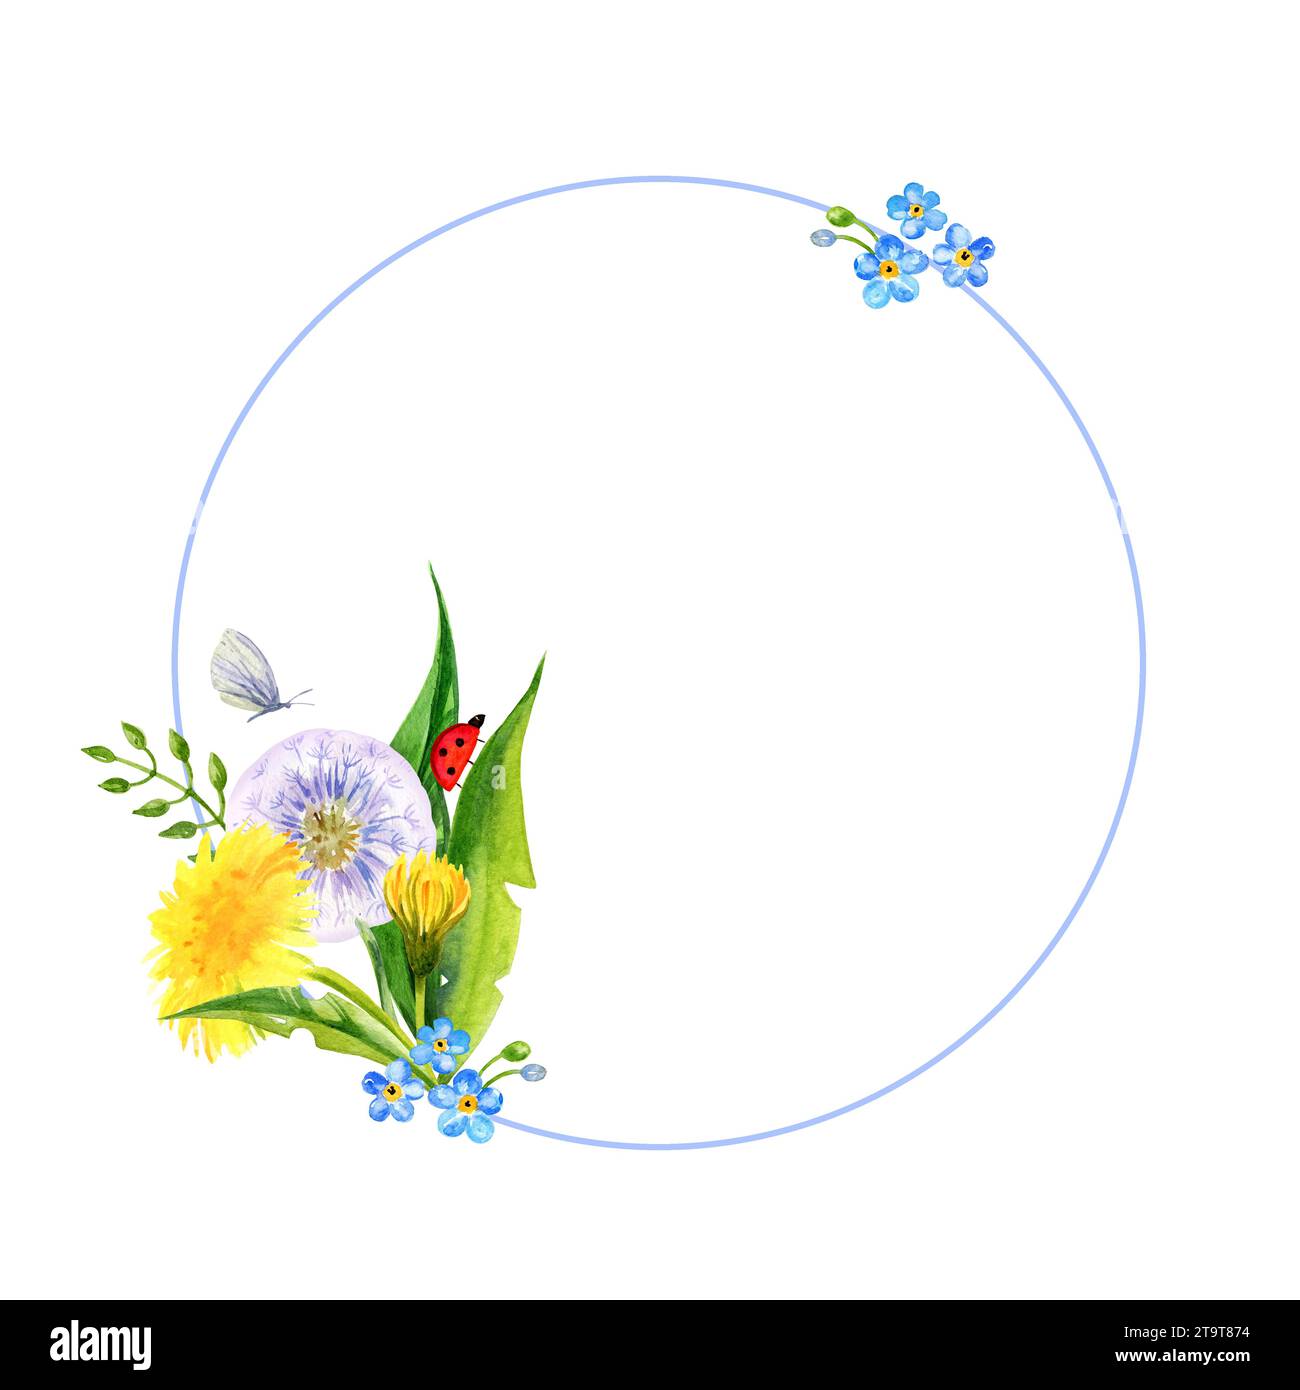 watercolor round frame with summer yellow flowers blow ball and ladybug, hand draw dandelions, forget me not flowers and leaves, herbs, sketch of spri Stock Photo